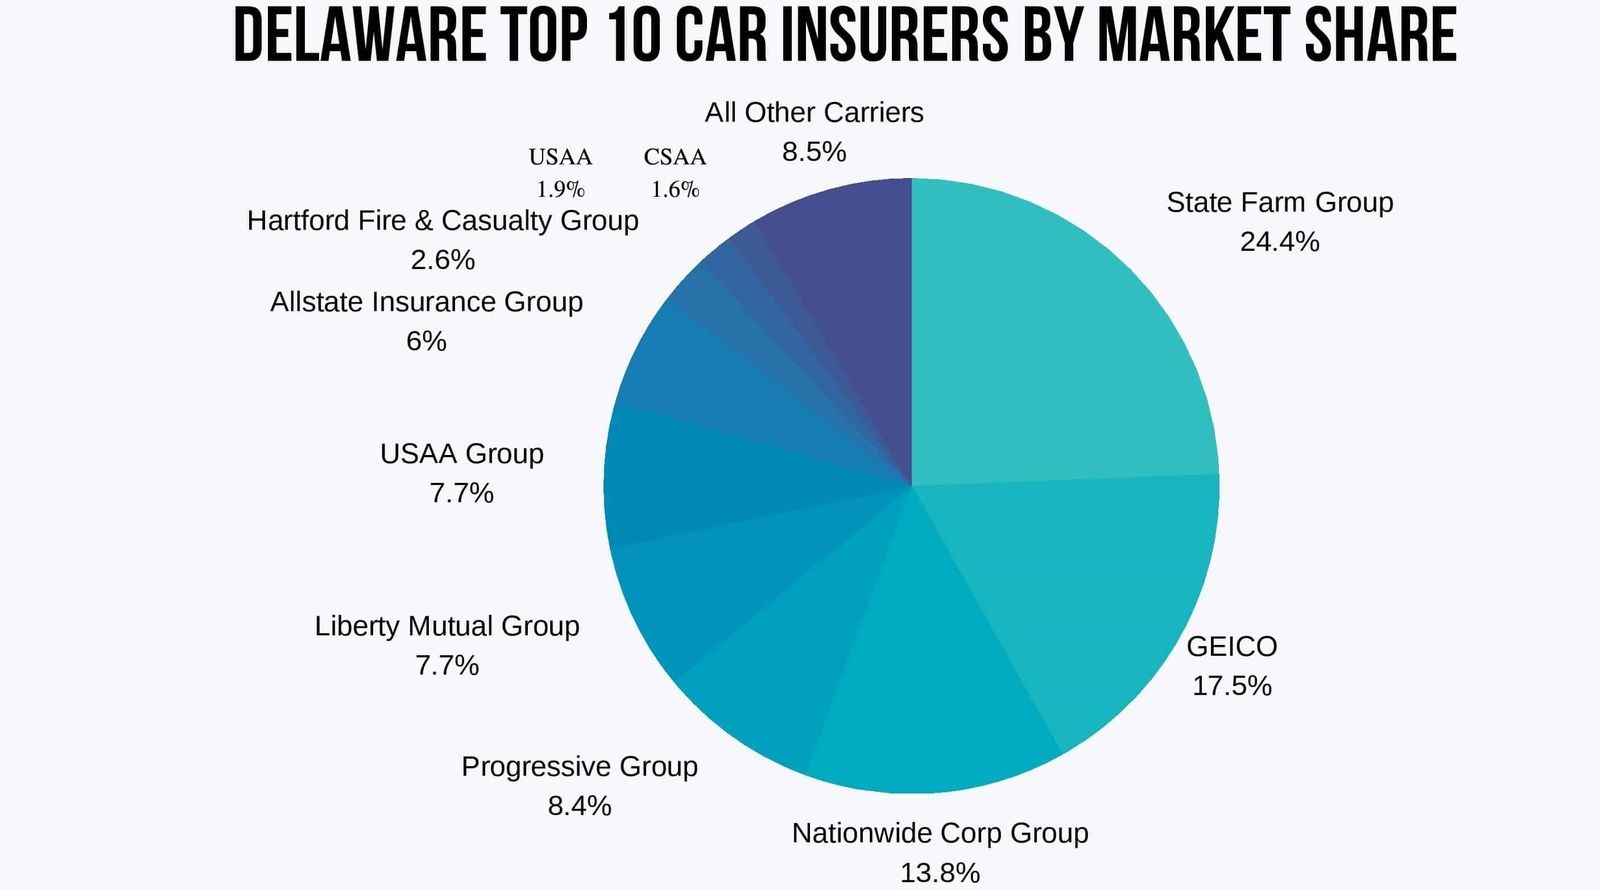 pie chart of Delaware's Top 10 Car Insurance Companies by Market Share